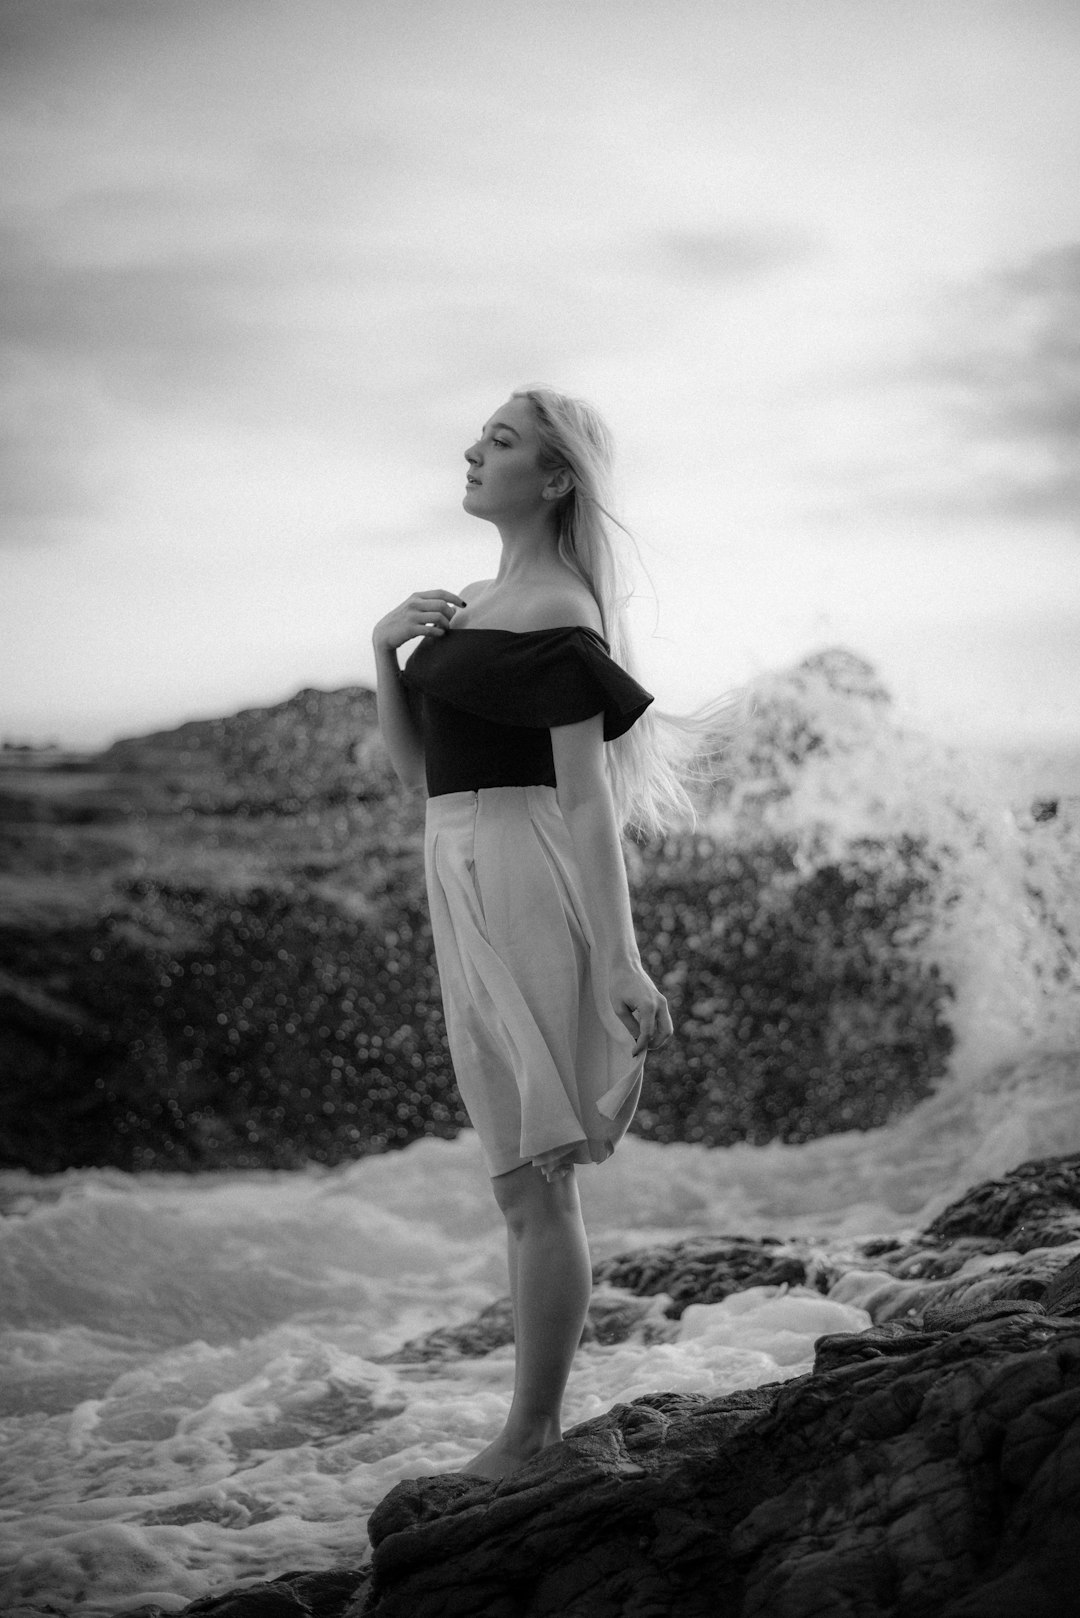 grayscale photo of woman in black tank top and skirt standing on rock